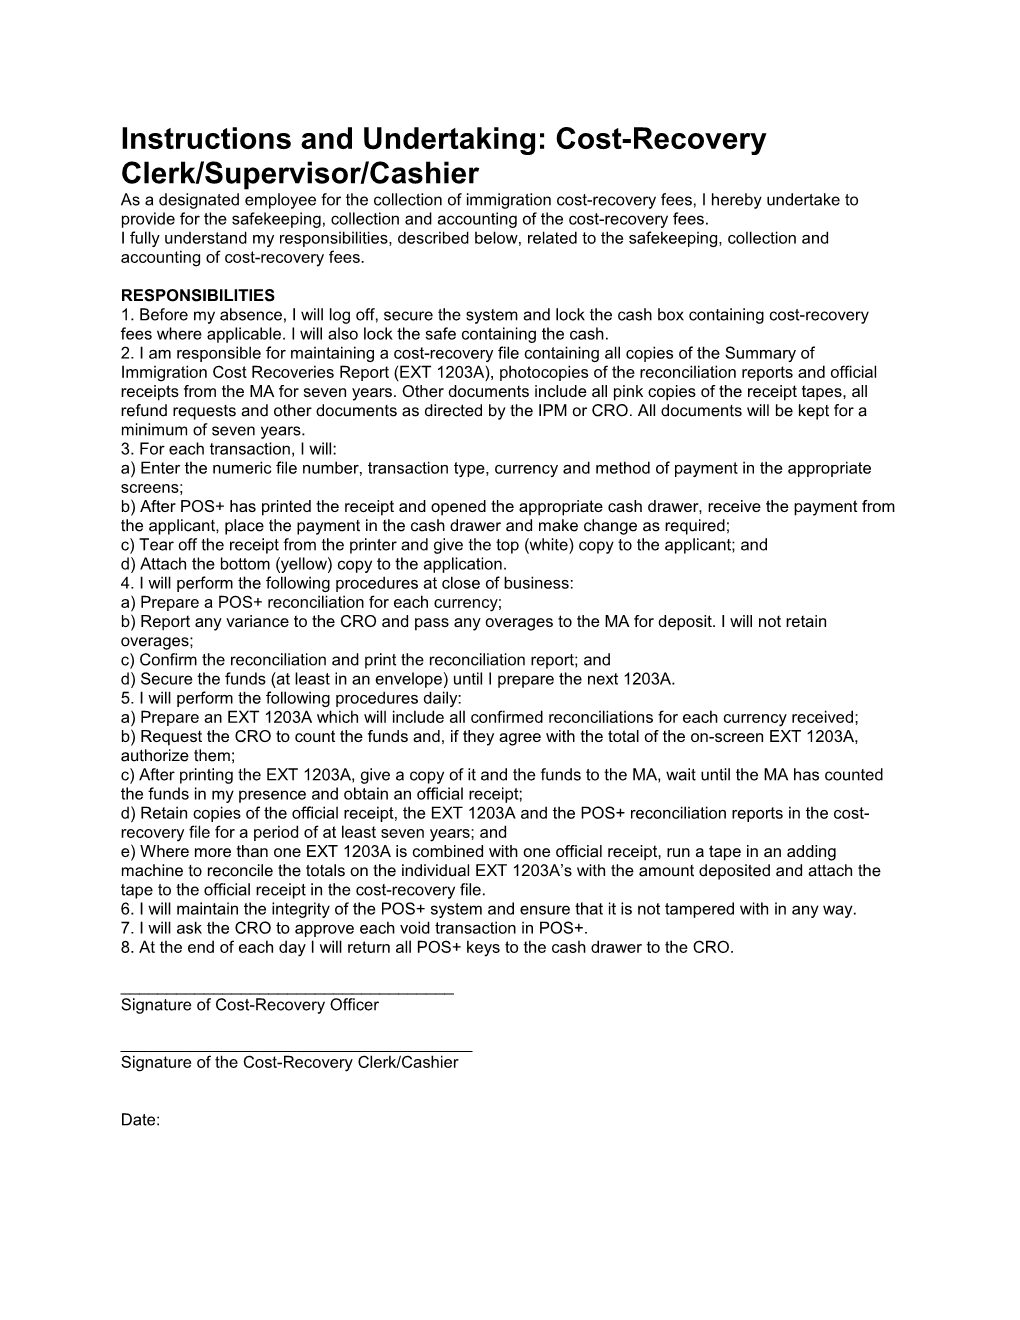 Instructions and Undertaking: Cost-Recovery Clerk/Supervisor/Cashier